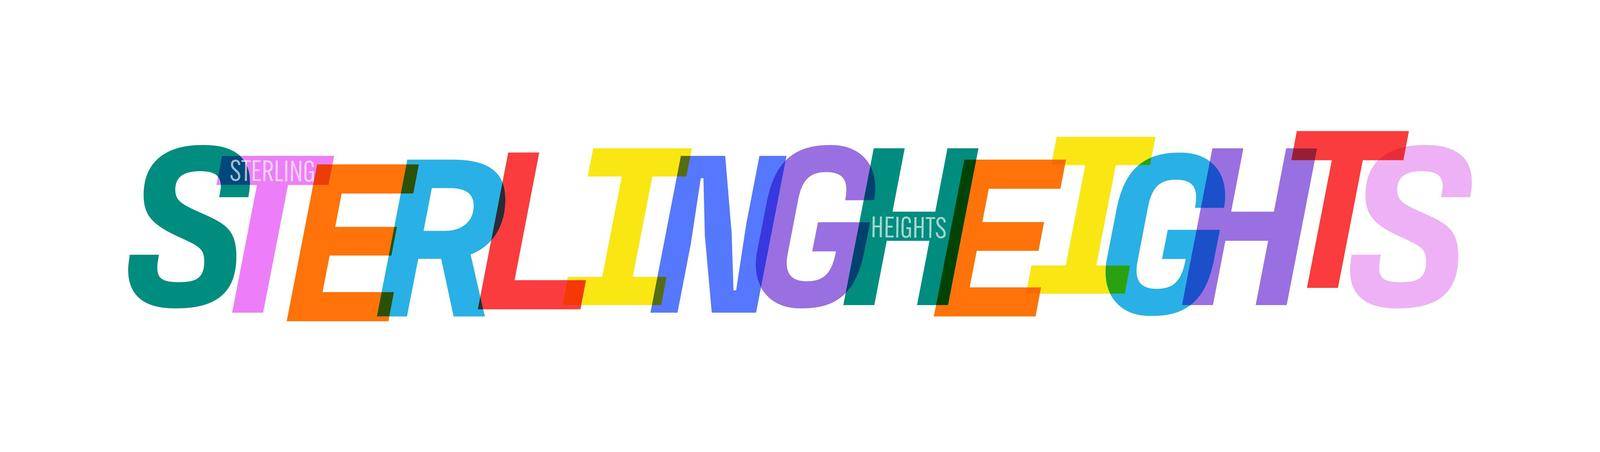 STERLING HEIGHTS. The name of the city on a white background. Vector design template for poster, postcard, banner. Vector illustration.